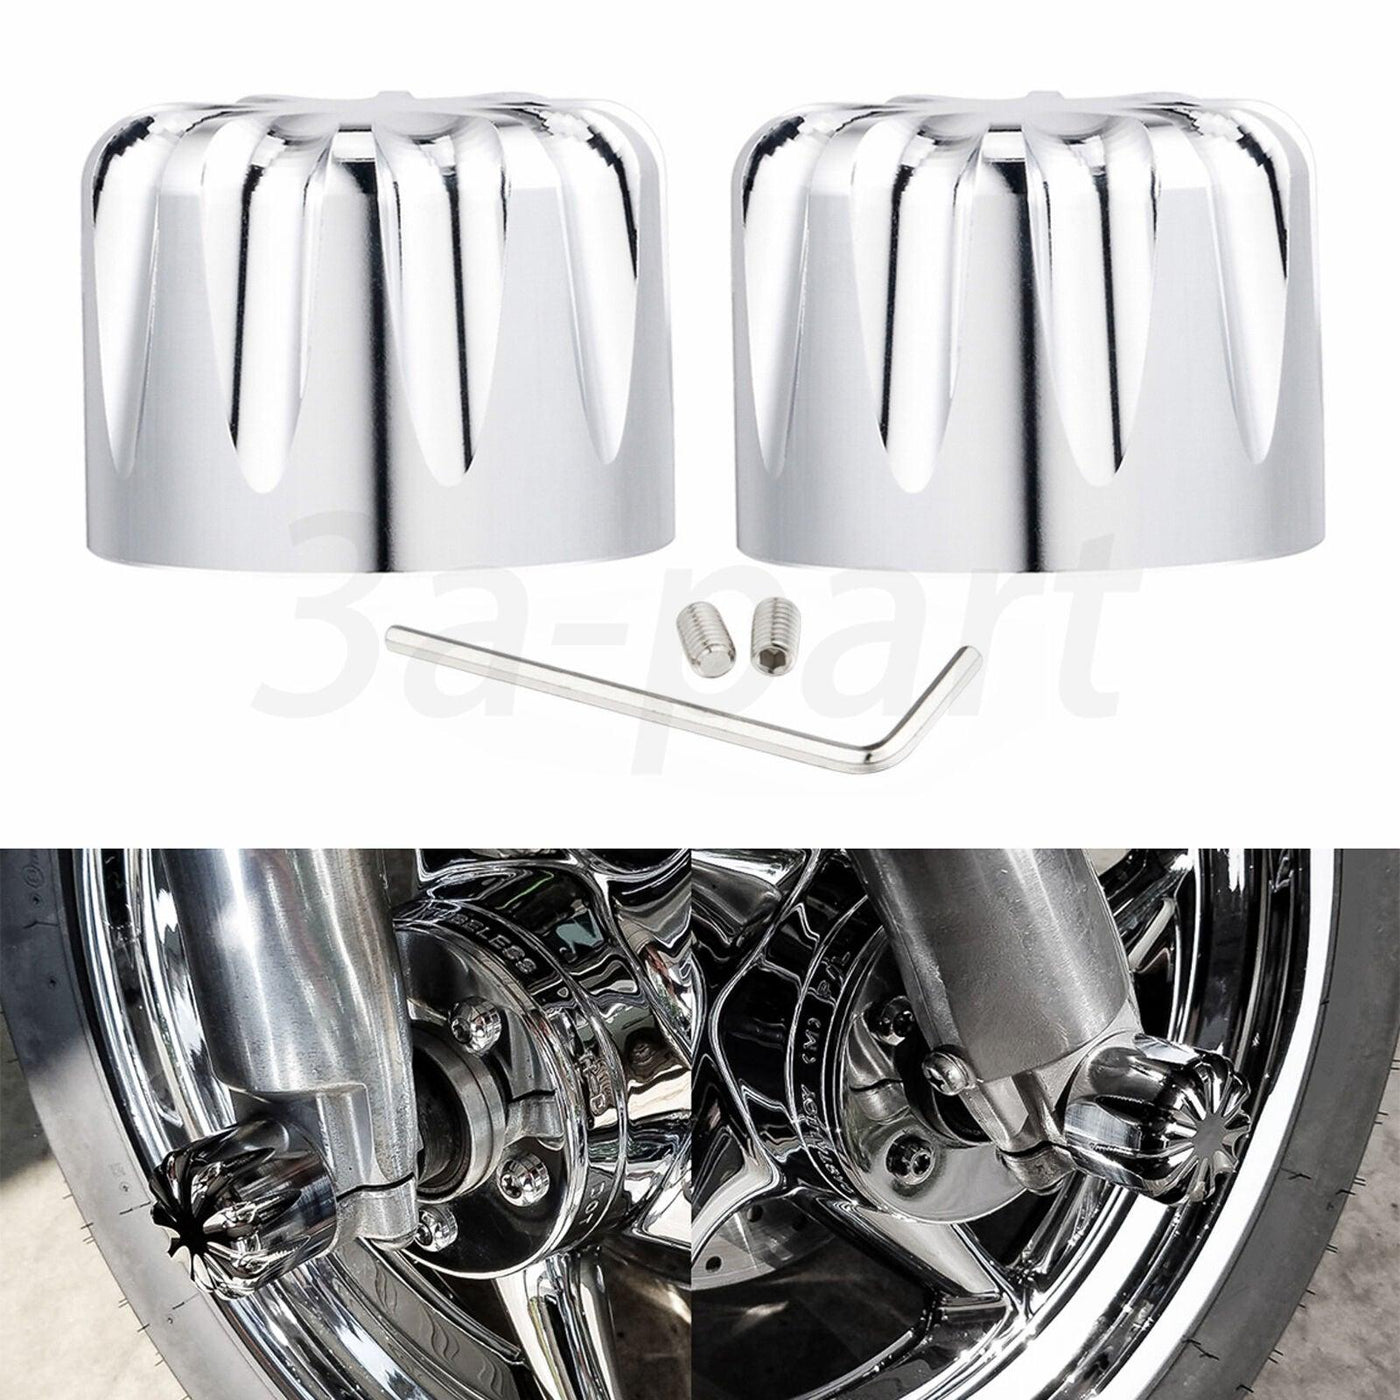 2x CNC Cut Front Chrome Axle Cap Nut Cover Fit for Harley Touring Dyna Road King - Moto Life Products